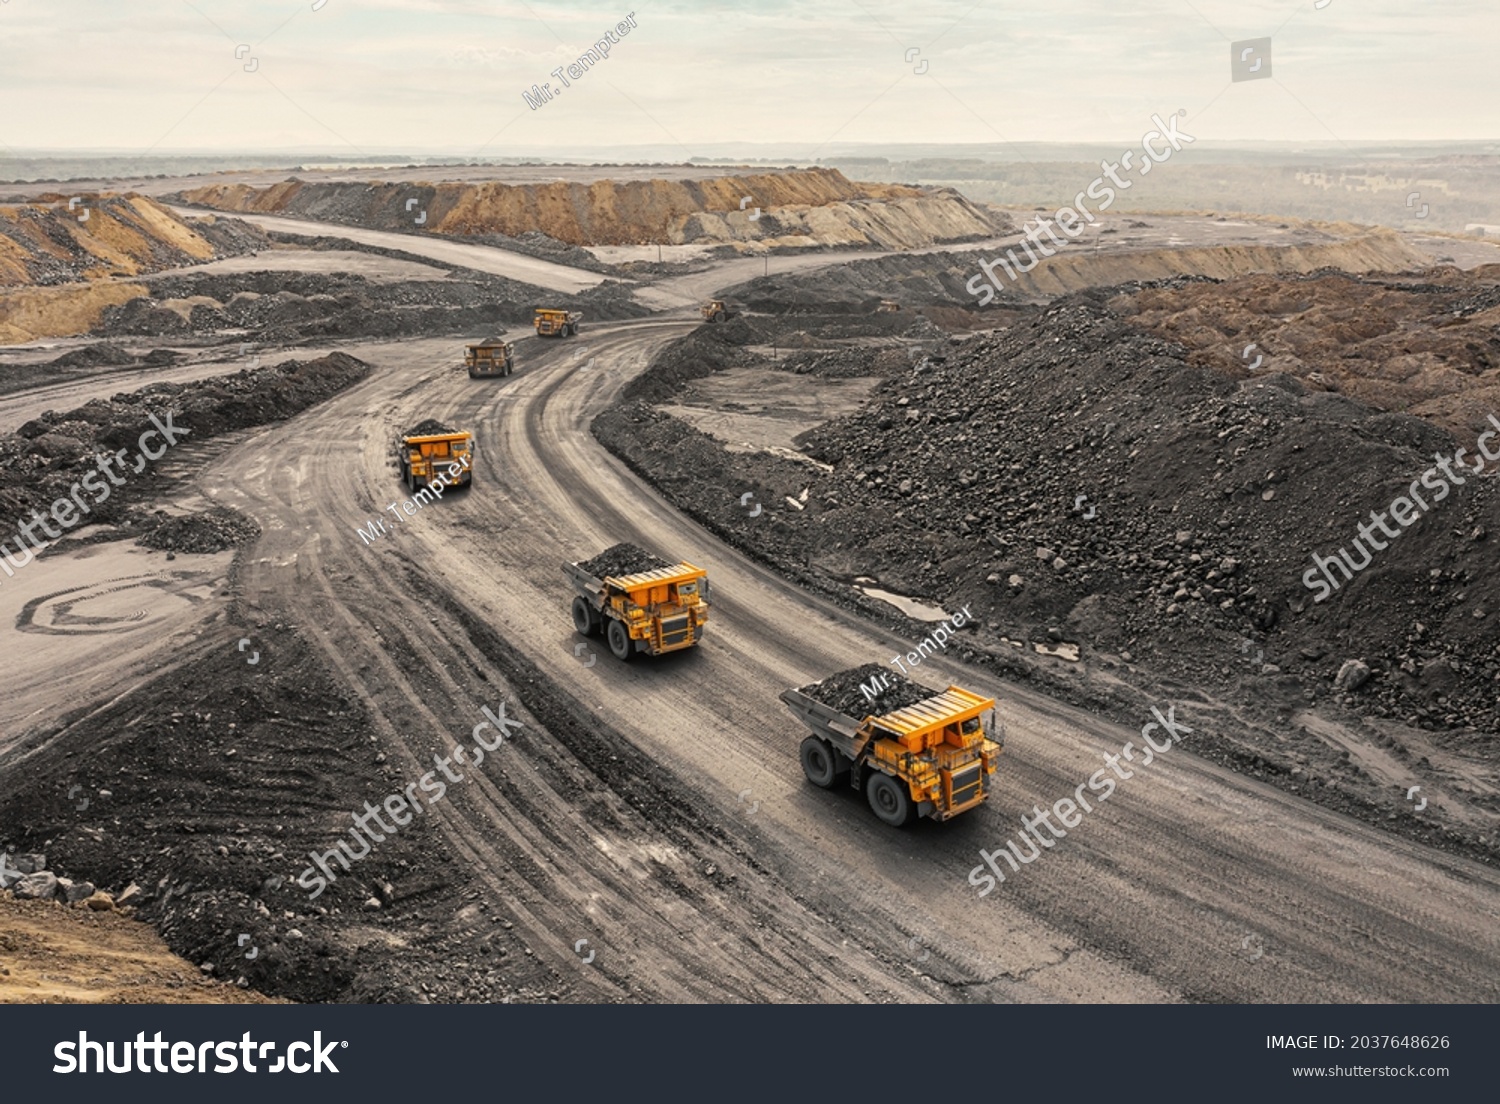 Large quarry dump truck. Big yellow mining truck at work site. Loading coal into body truck. Production useful minerals. Mining truck mining machinery to transport coal from open-pit production #2037648626